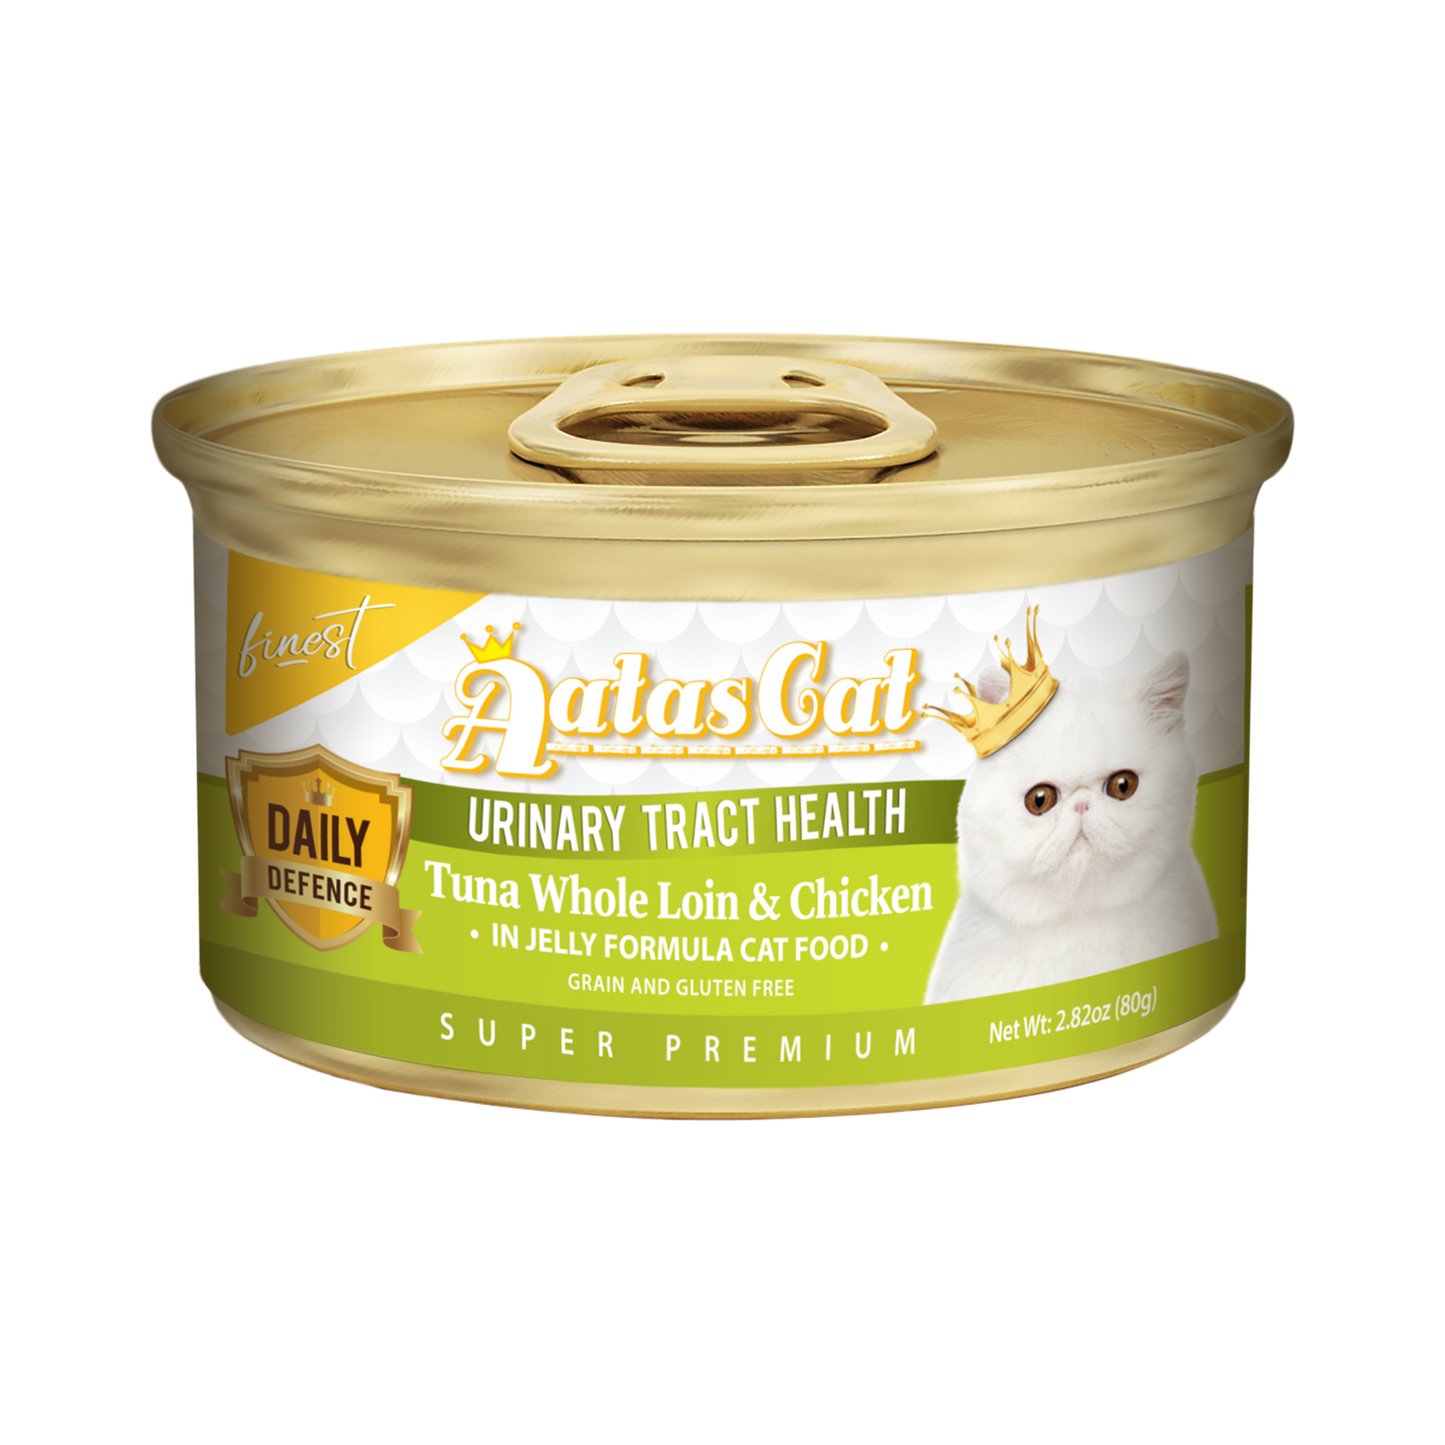 Aatas Cat Finest Daily Defence Urinary Tract Health Tuna Whole Loin & Chicken in Jelly Formula Cat Food 80g